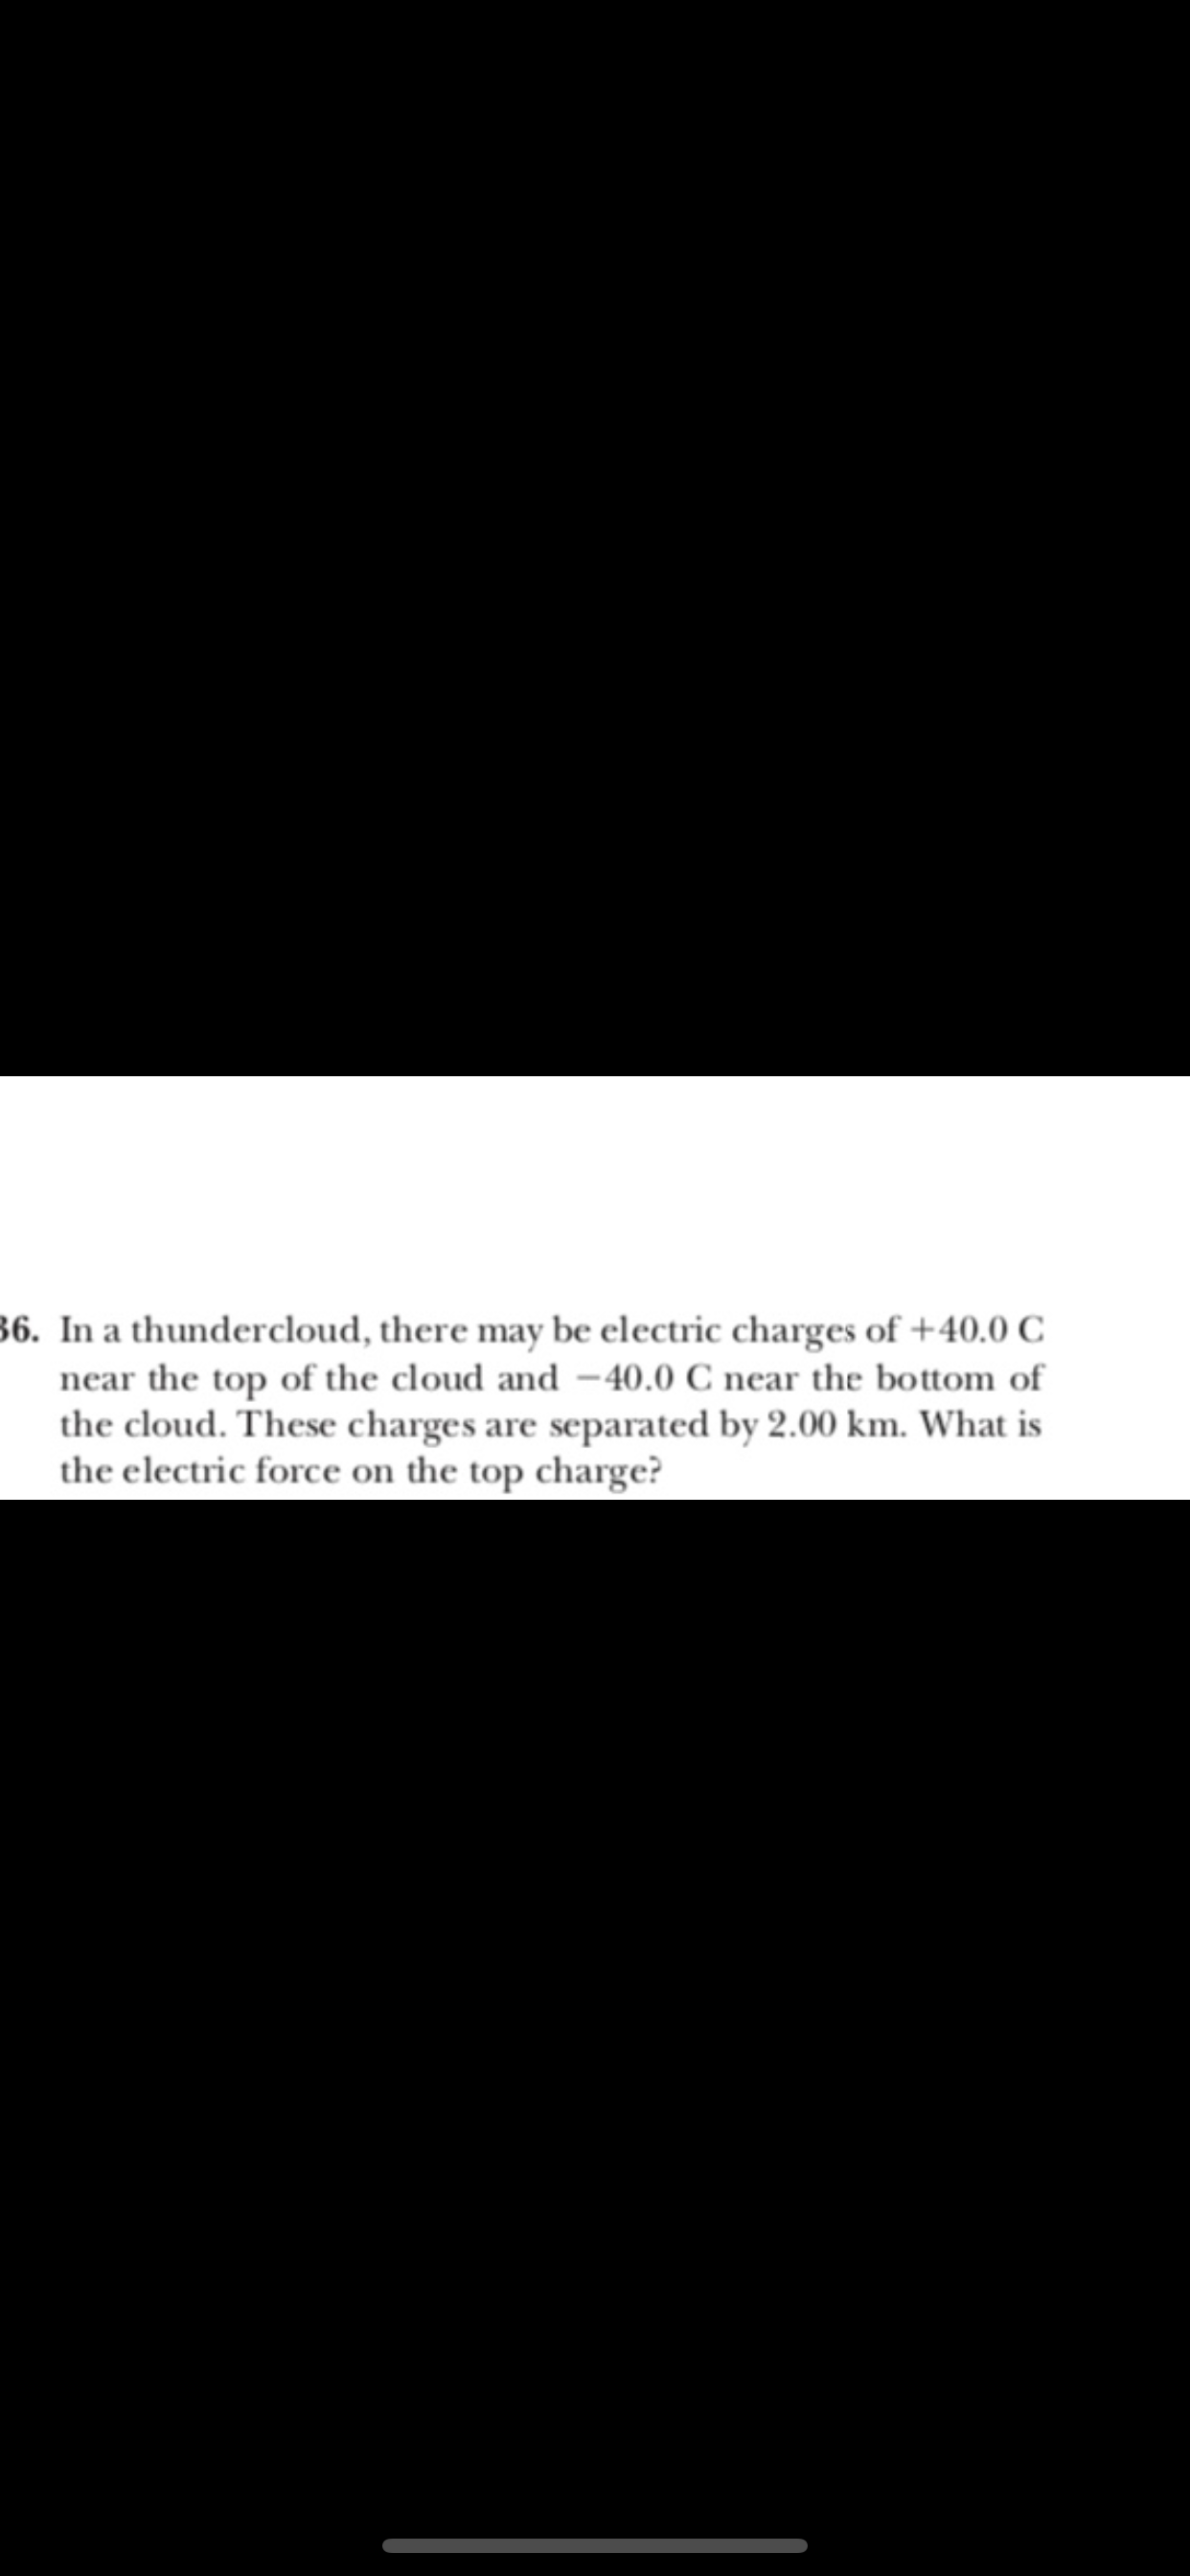 36. In a thundercloud, there may be electric charges of +40.0 C
near the top of the cloud and -40.0 C near the bo ttom of
the cloud. These charges are separated by 2.00 km. What is
the electric force on the top charge?
